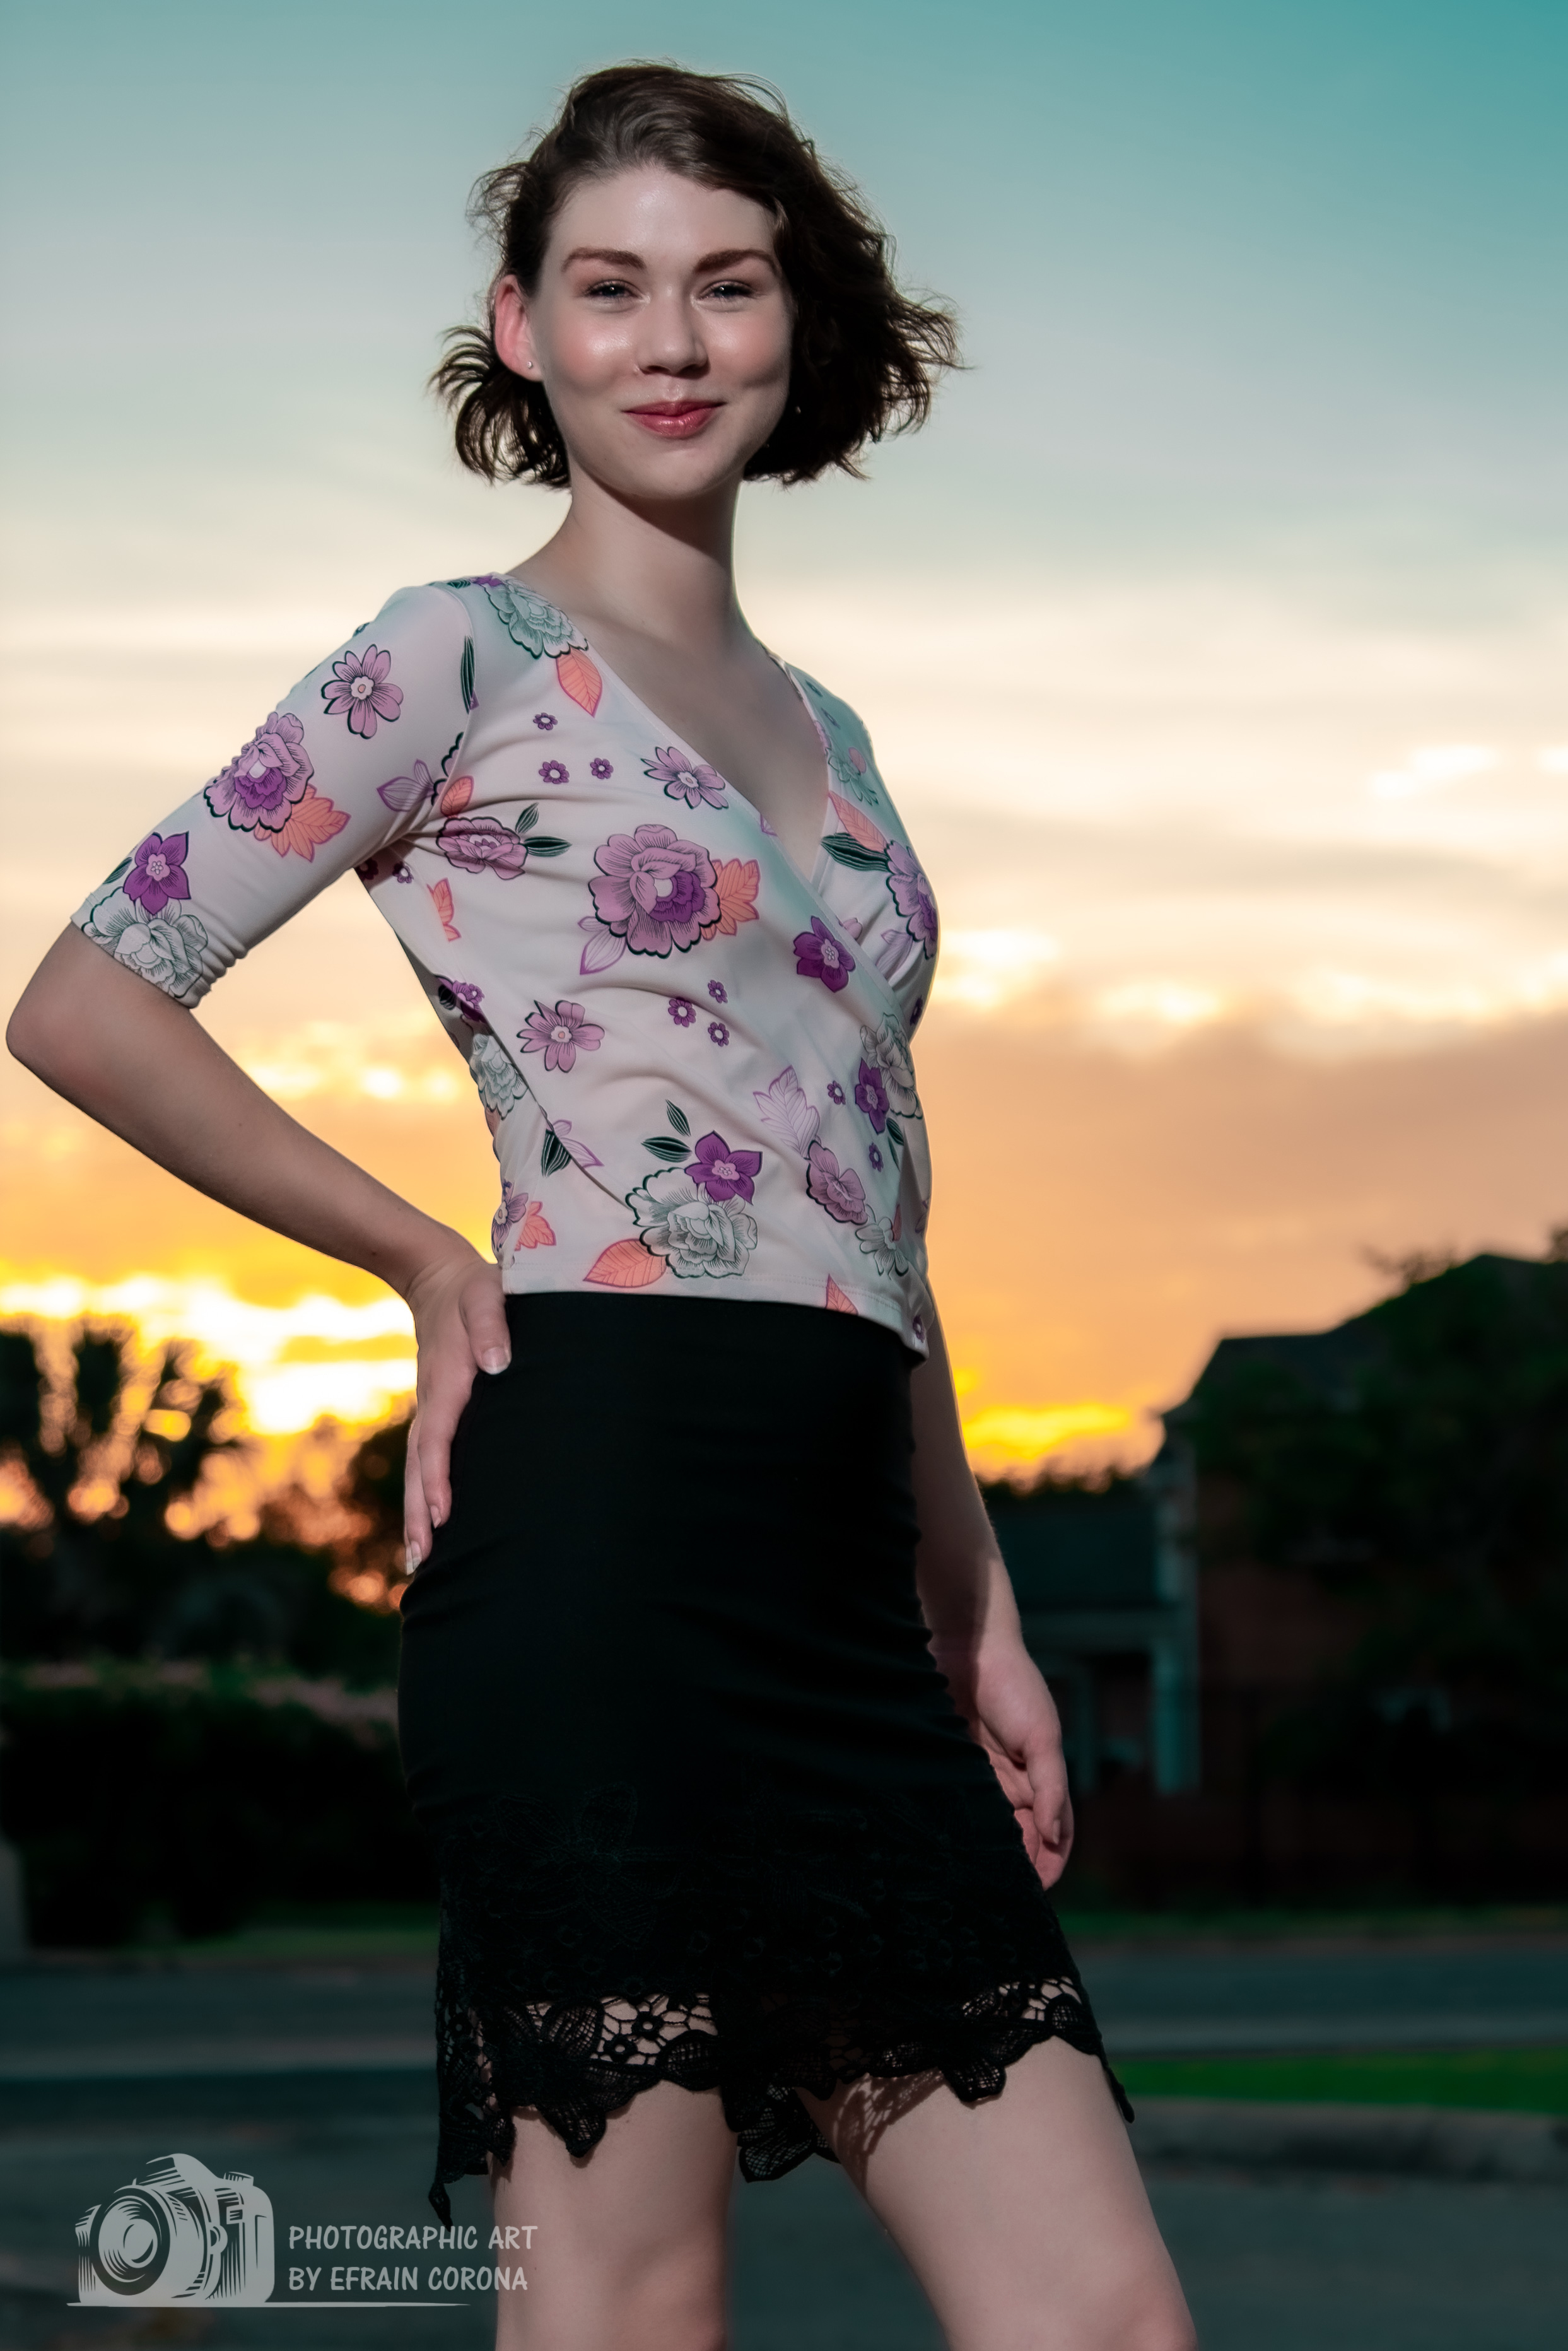 Hailey posing by the sunset in a pink floral blouse and black skirt.